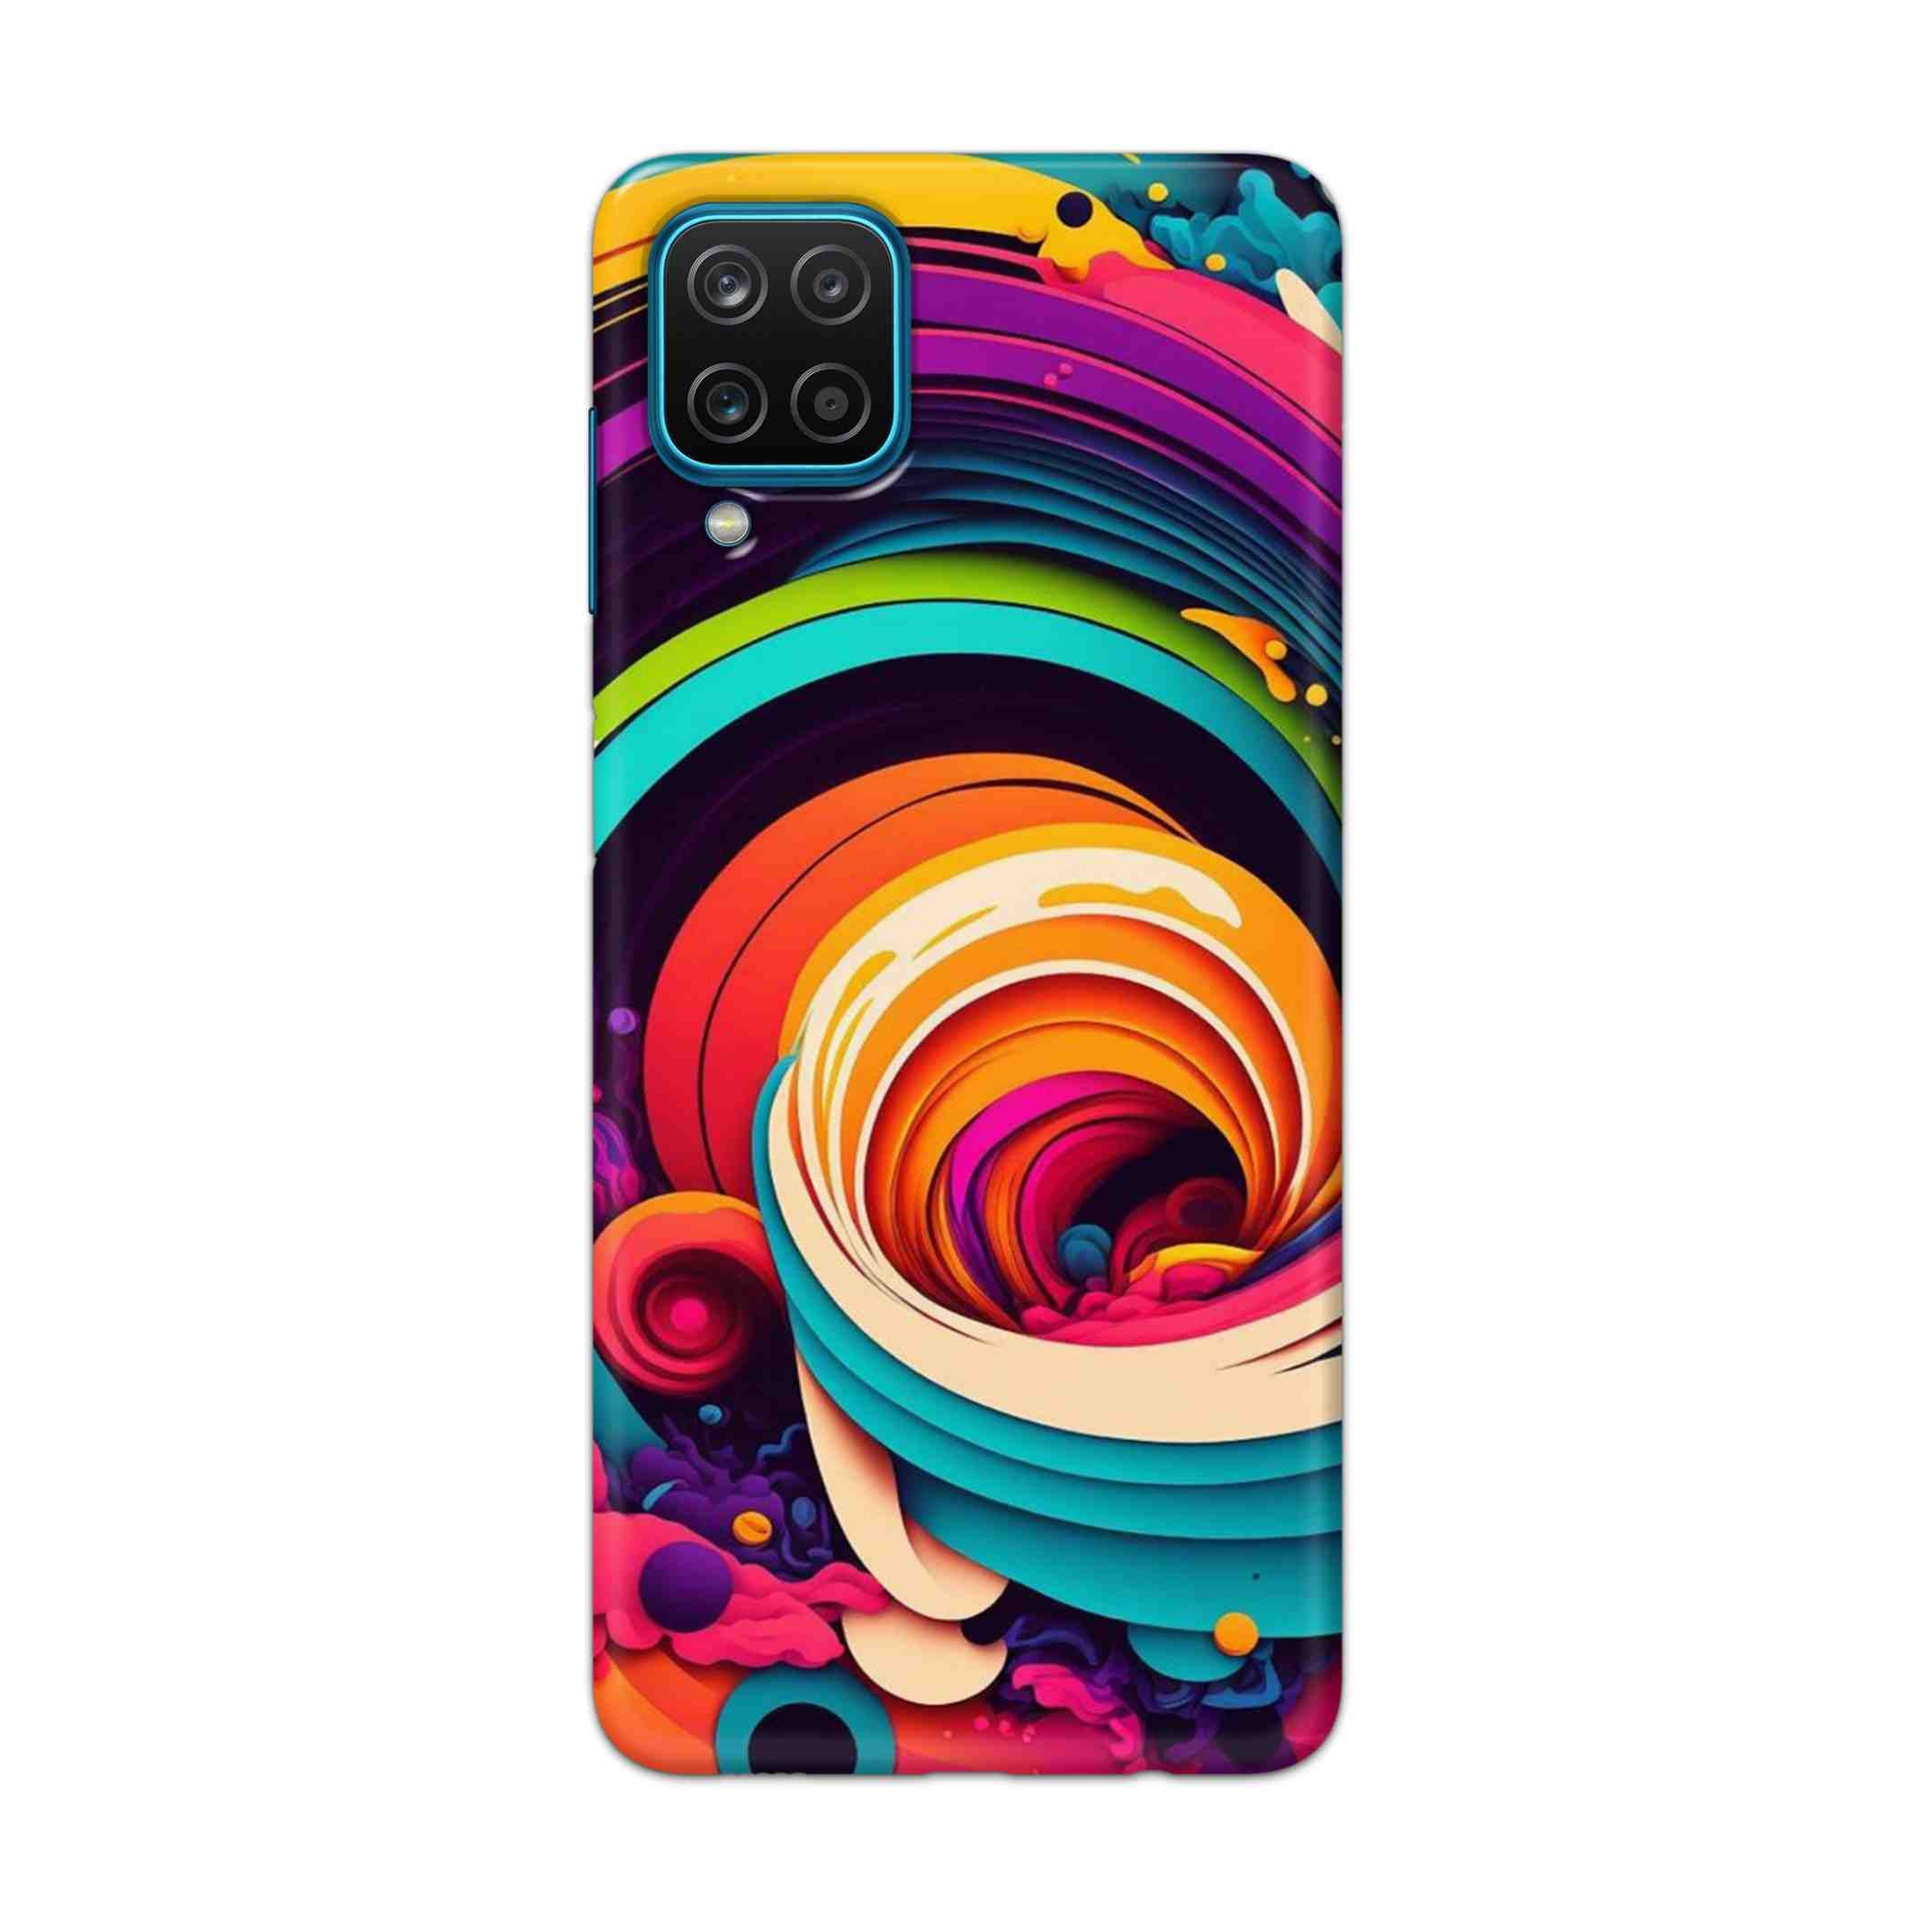 Buy Colour Circle Hard Back Mobile Phone Case Cover For Samsung Galaxy A12 Online